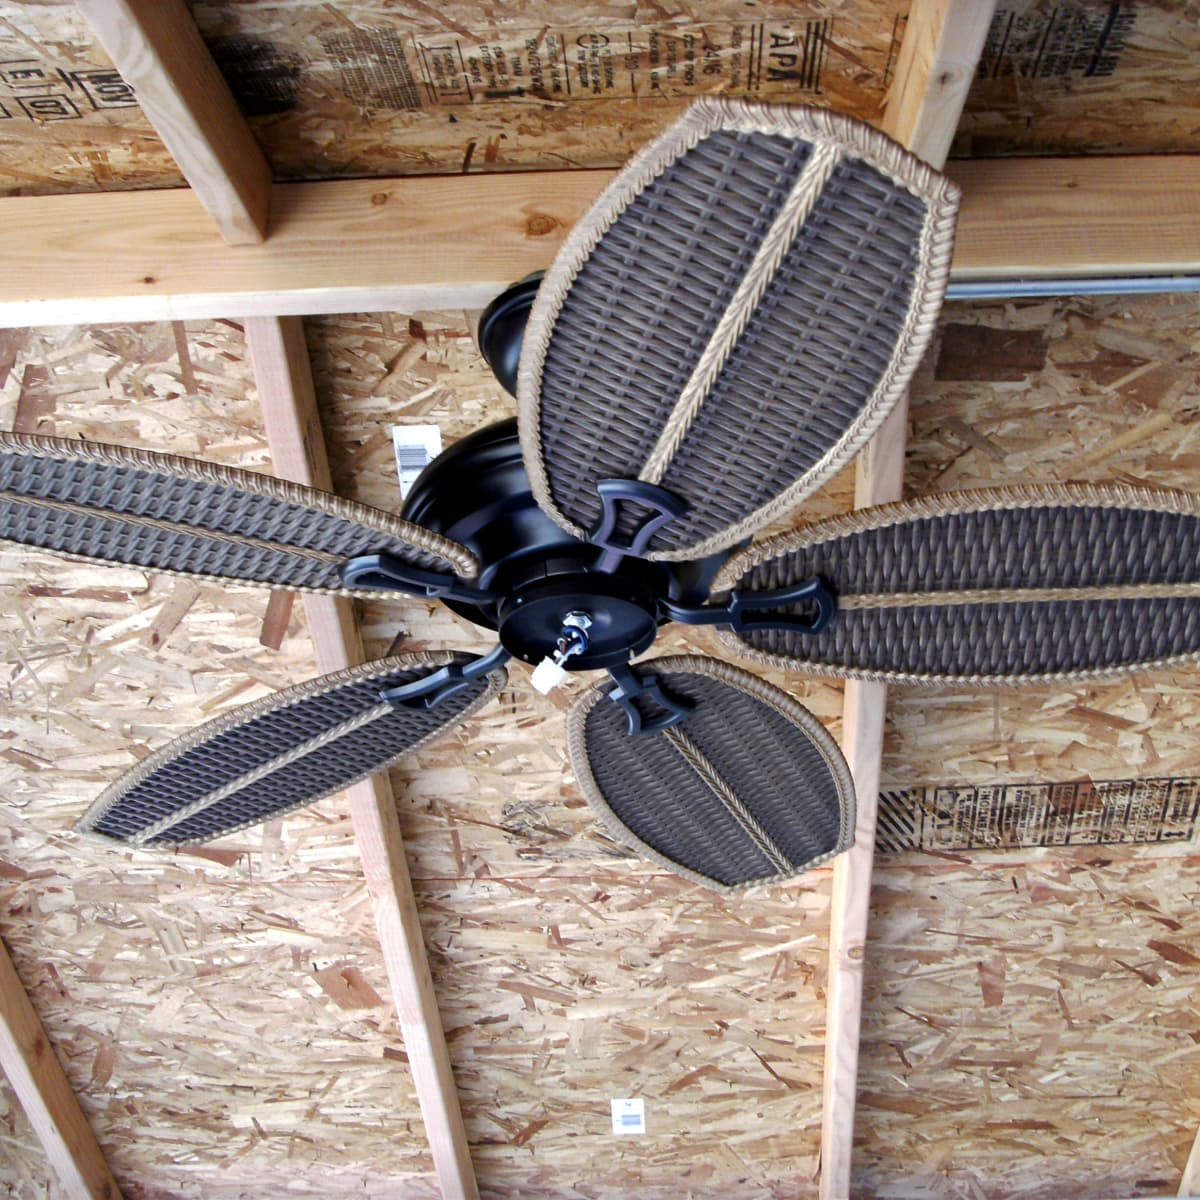 How To Install Or Hang A Ceiling Fan